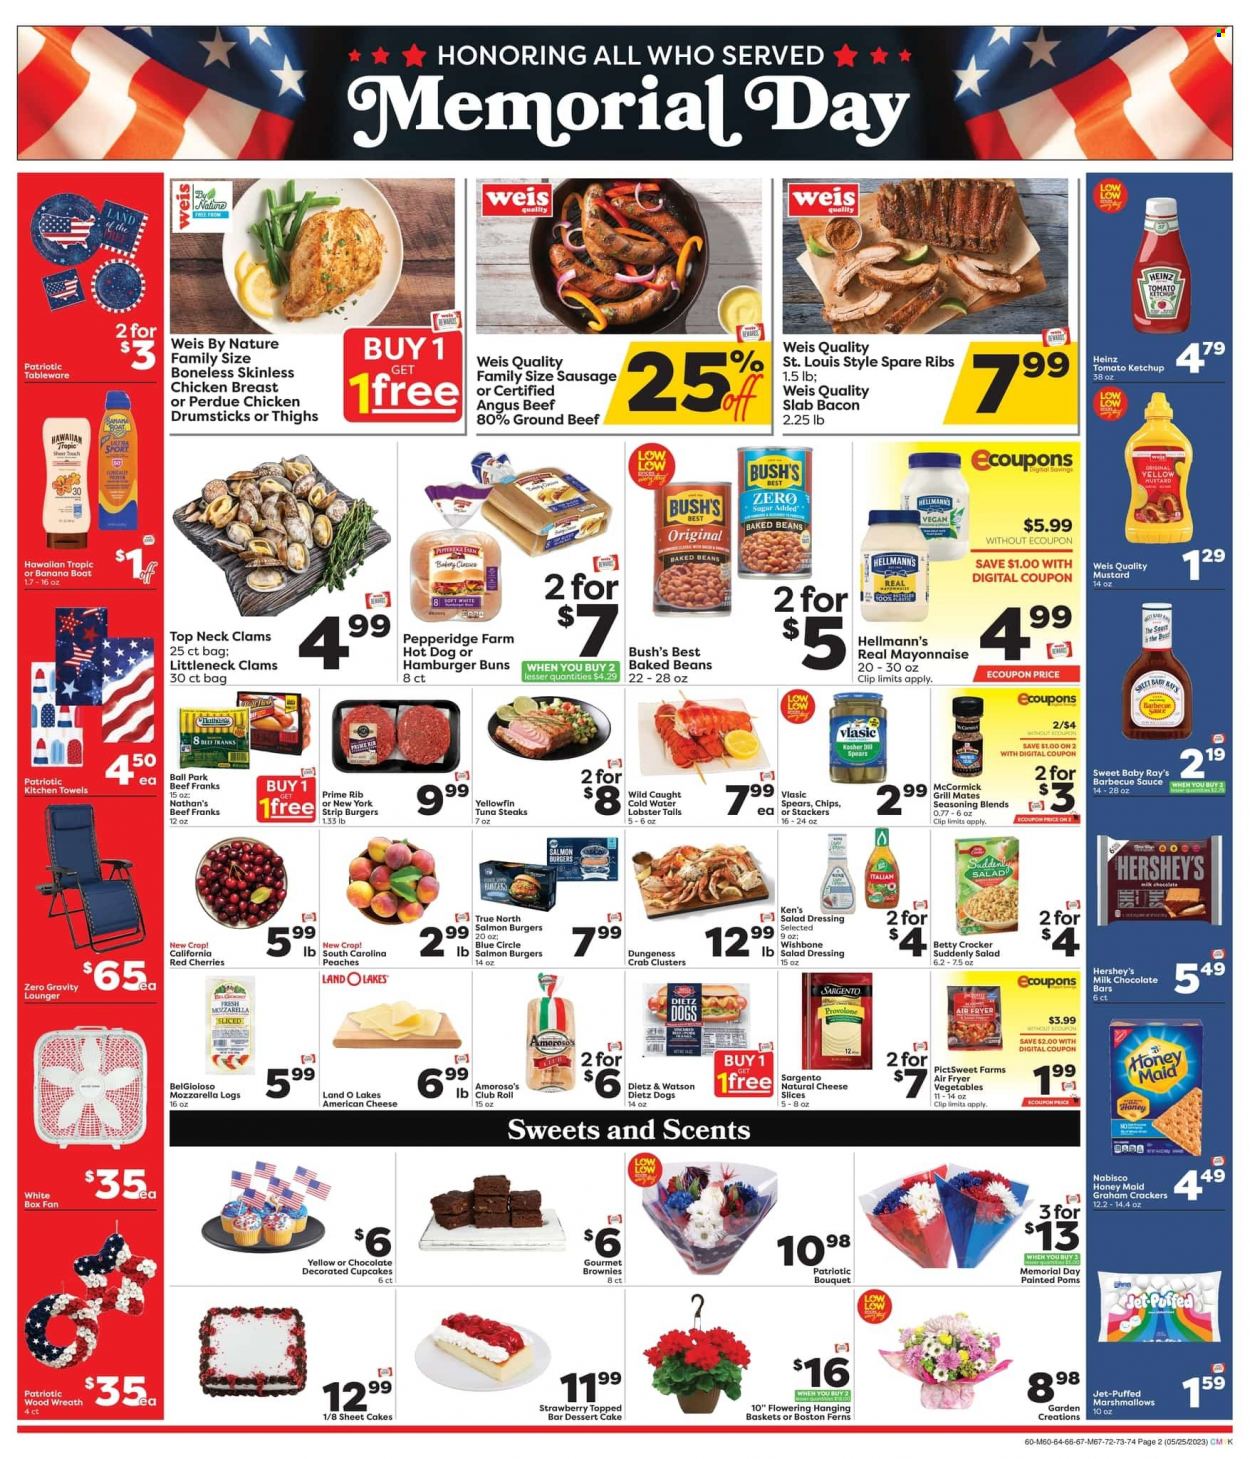 thumbnail - Weis Flyer - 05/25/2023 - 05/31/2023 - Sales products - cake, buns, burger buns, cupcake, brownies, dessert, beans, cherries, peaches, chicken drumsticks, Perdue®, beef meat, ground beef, steak, ribs, fish burger, pork spare ribs, clams, lobster, tuna, crab, lobster tail, crab clusters, hot dog, ready meal, bacon, Dietz & Watson, frankfurters, american cheese, mozzarella, sliced cheese, cheese, Provolone, Sargento, mayonnaise, Hellmann’s, Hershey's, graham crackers, marshmallows, milk chocolate, crackers, chocolate bar, Nabisco, chips, Heinz, baked beans, Honey Maid, dill, spice, BBQ sauce, mustard, salad dressing, ketchup, dressing, water, kitchen towels, Jet, Hawaiian Tropic, tableware, wreath, hanging basket, bouquet. Page 2.